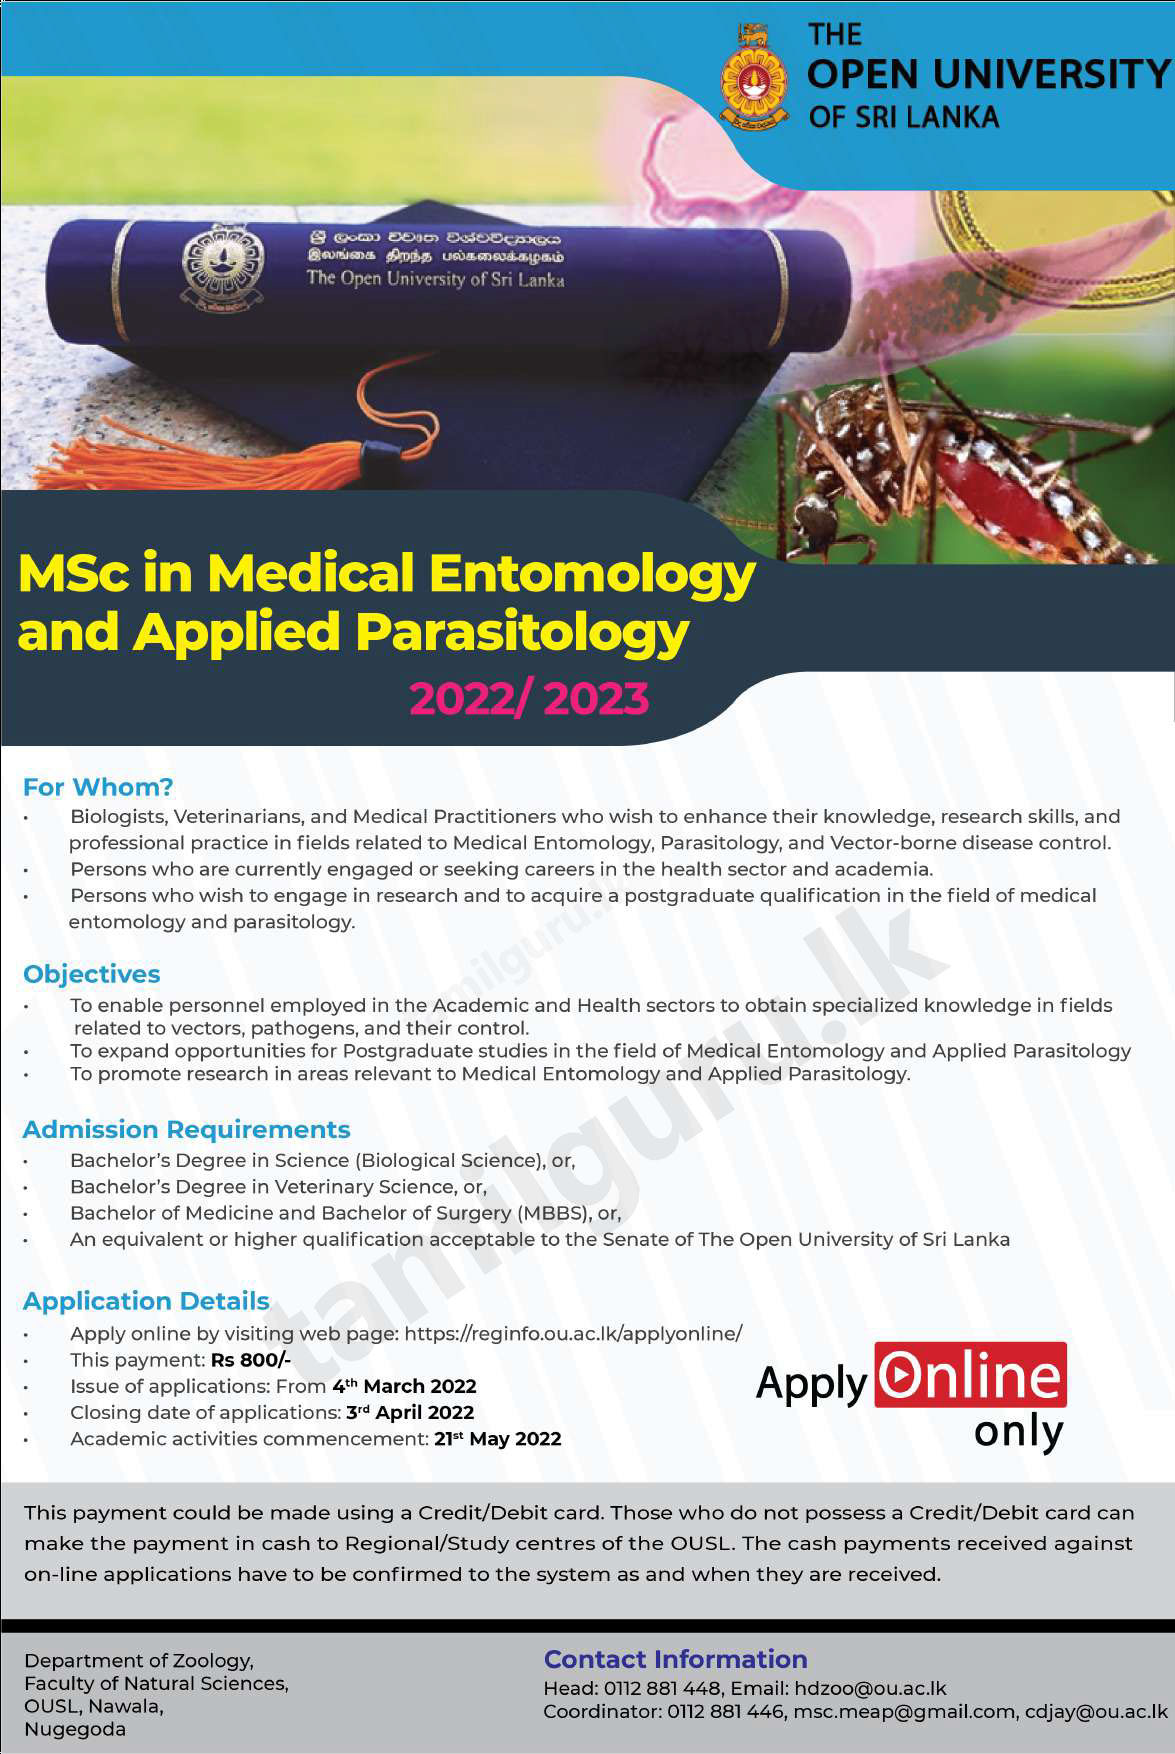 Master of Science (MSc) in Medical Entomology & Applied Parasitology 2022 - The Open University of Sri Lanka (OUSL) Notice in English